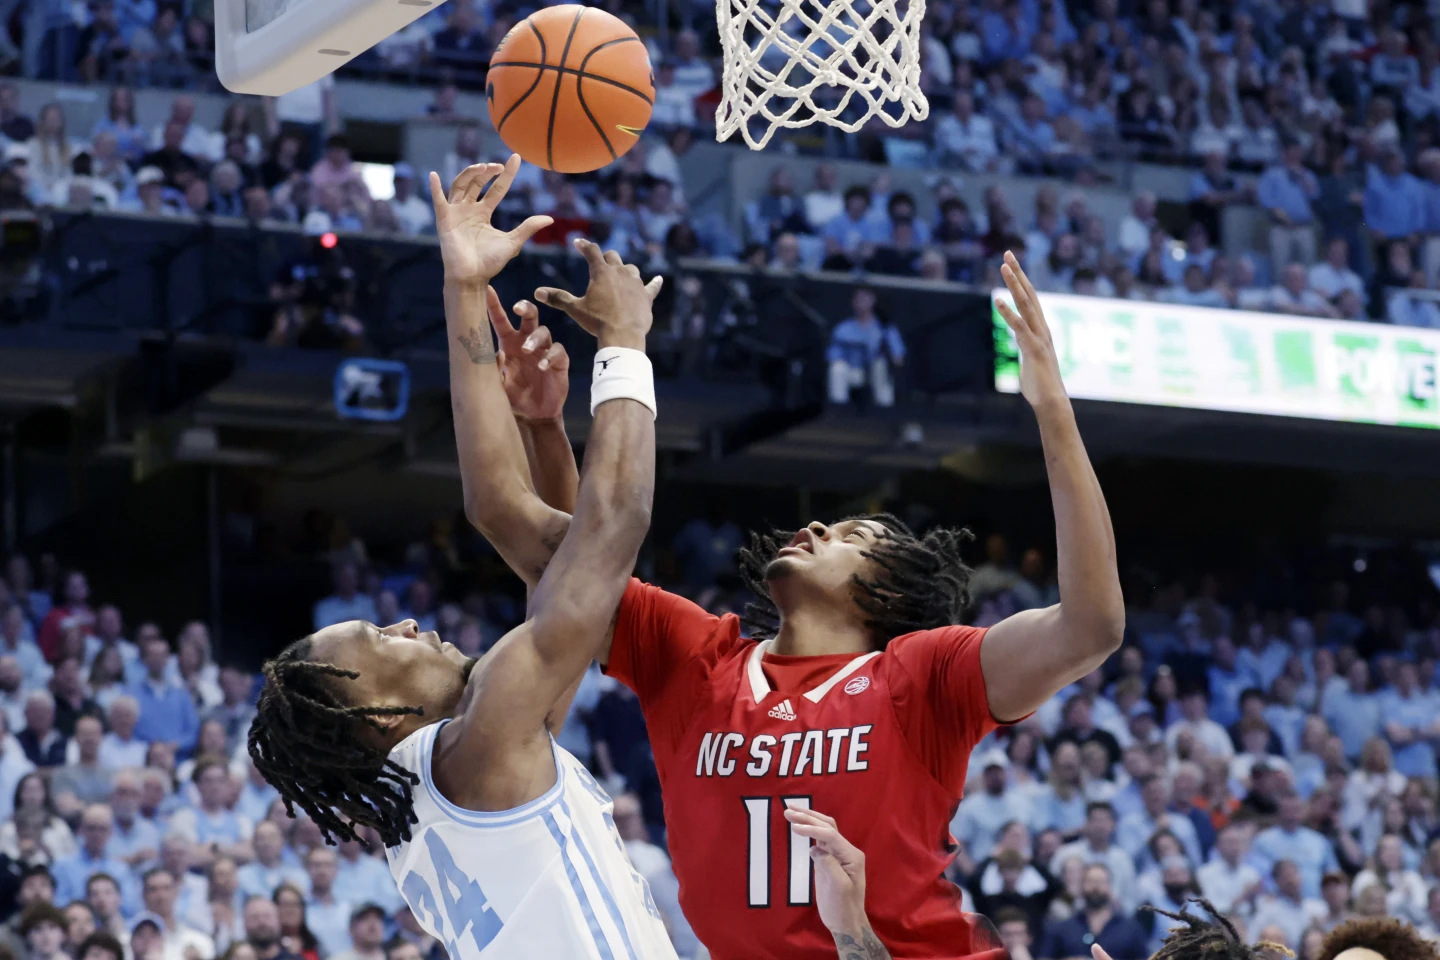 UNC Basketball flips defensive switch at halftime, rallies to beat NC State